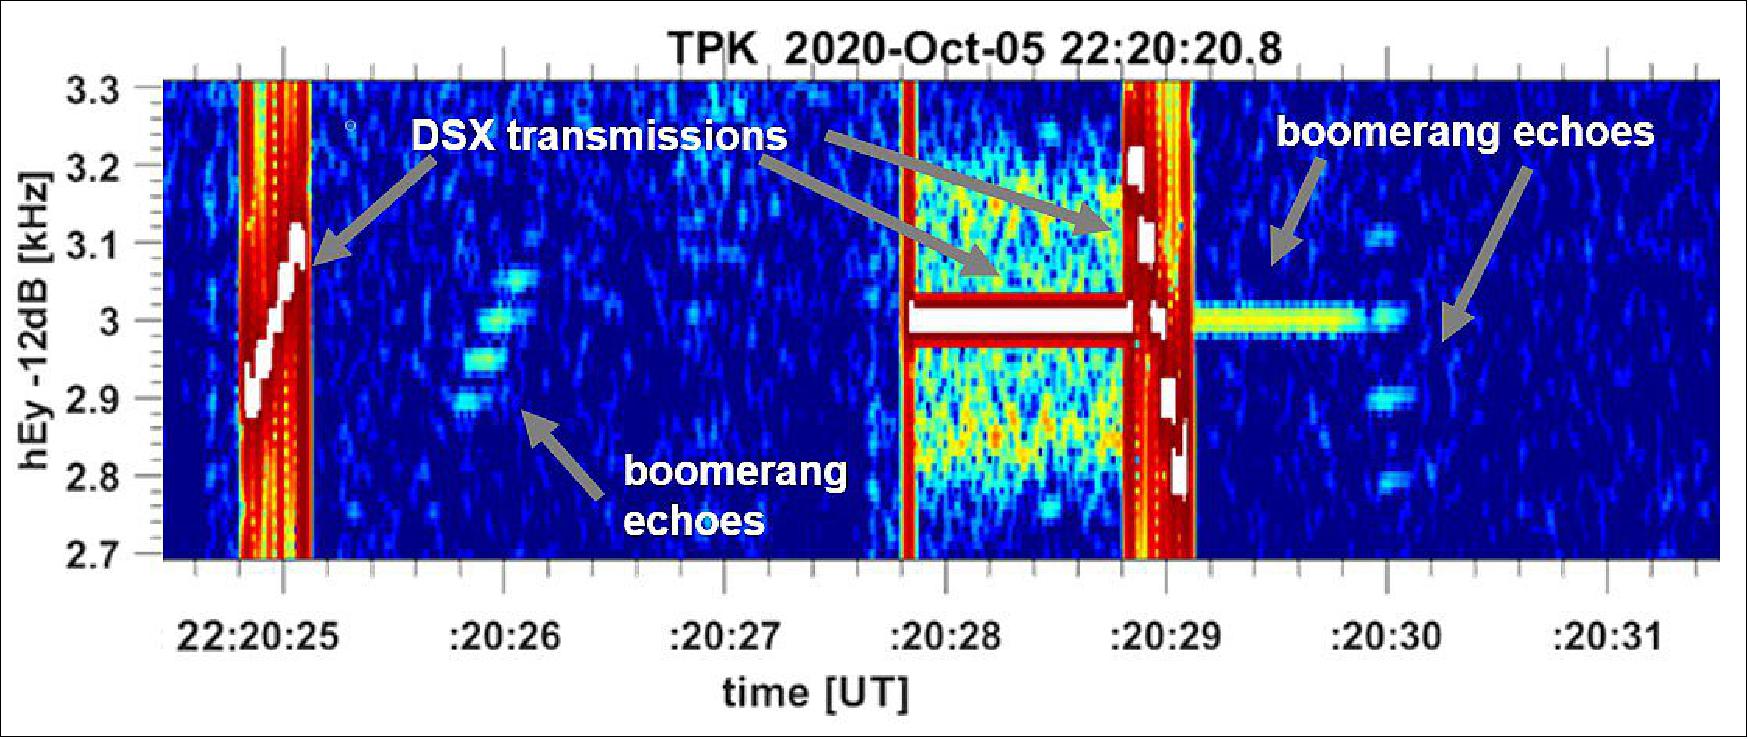 Figure 6: A spectrogram from the Broad Band Receiver on AFRL’s Demonstration and Science Experiments (DSX) spacecraft showing “boomerang” signals on Oct. 5, 2020. Colors show radio wave power with transmissions from DSX and return echo signals (boomerangs) indicated. It shows a seven-second time period from left to right and radio frequency increasing from bottom to top. This is one of dozens of boomerangs seen by DSX, which are being analyzed to understand how very low frequency (VLF) radio waves behave in near-Earth space (image credit: Stanford University)